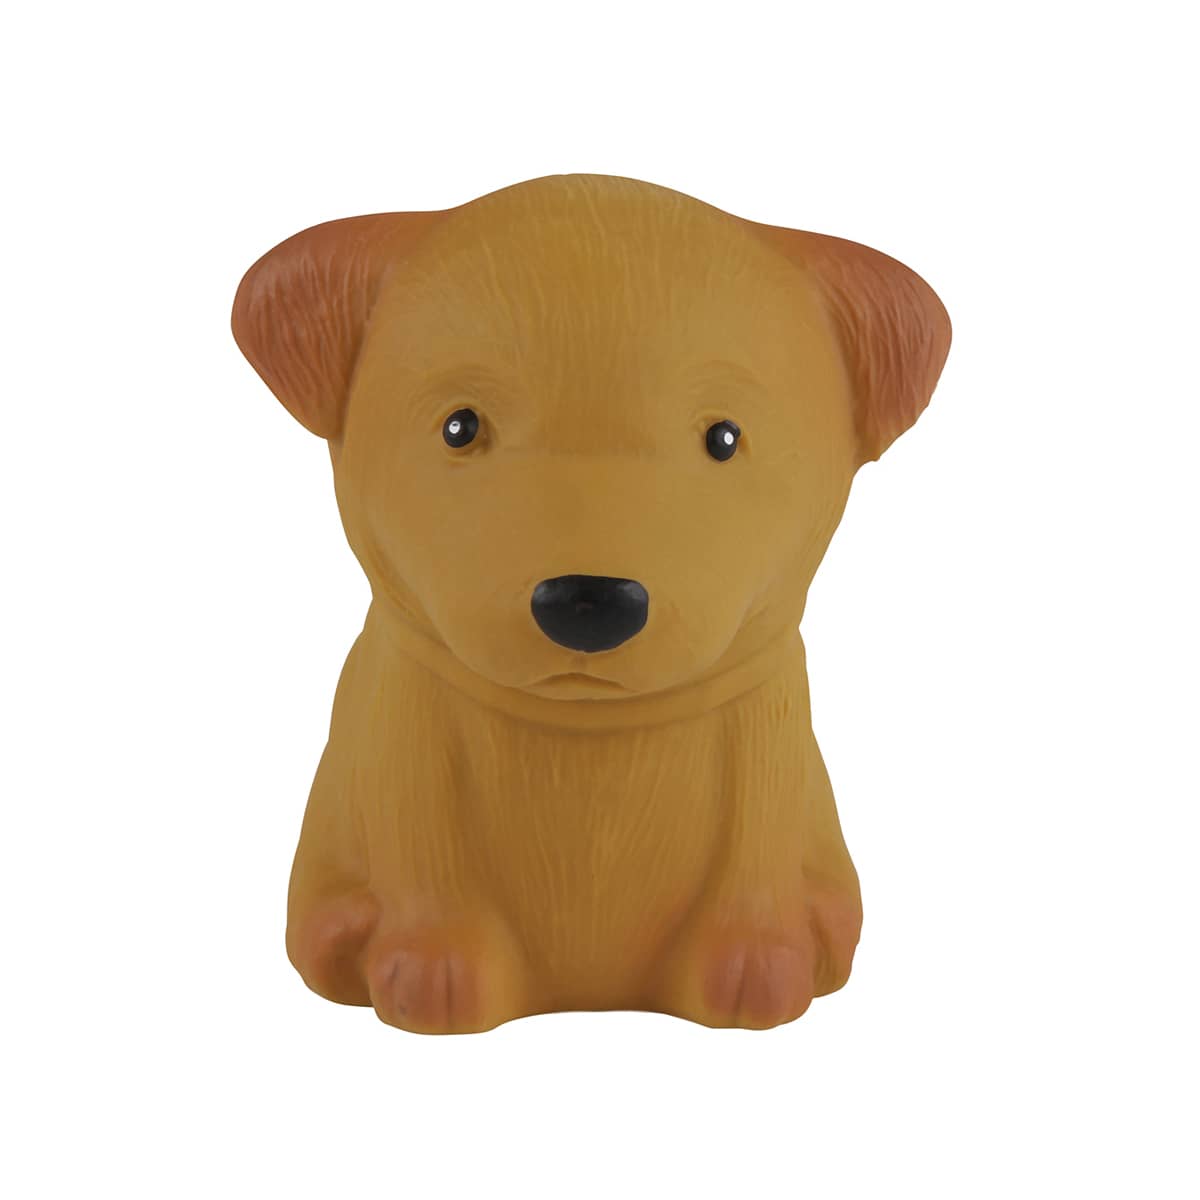 Hevea Puppy Parade Natural Rubber Puppy Toy - Poodle